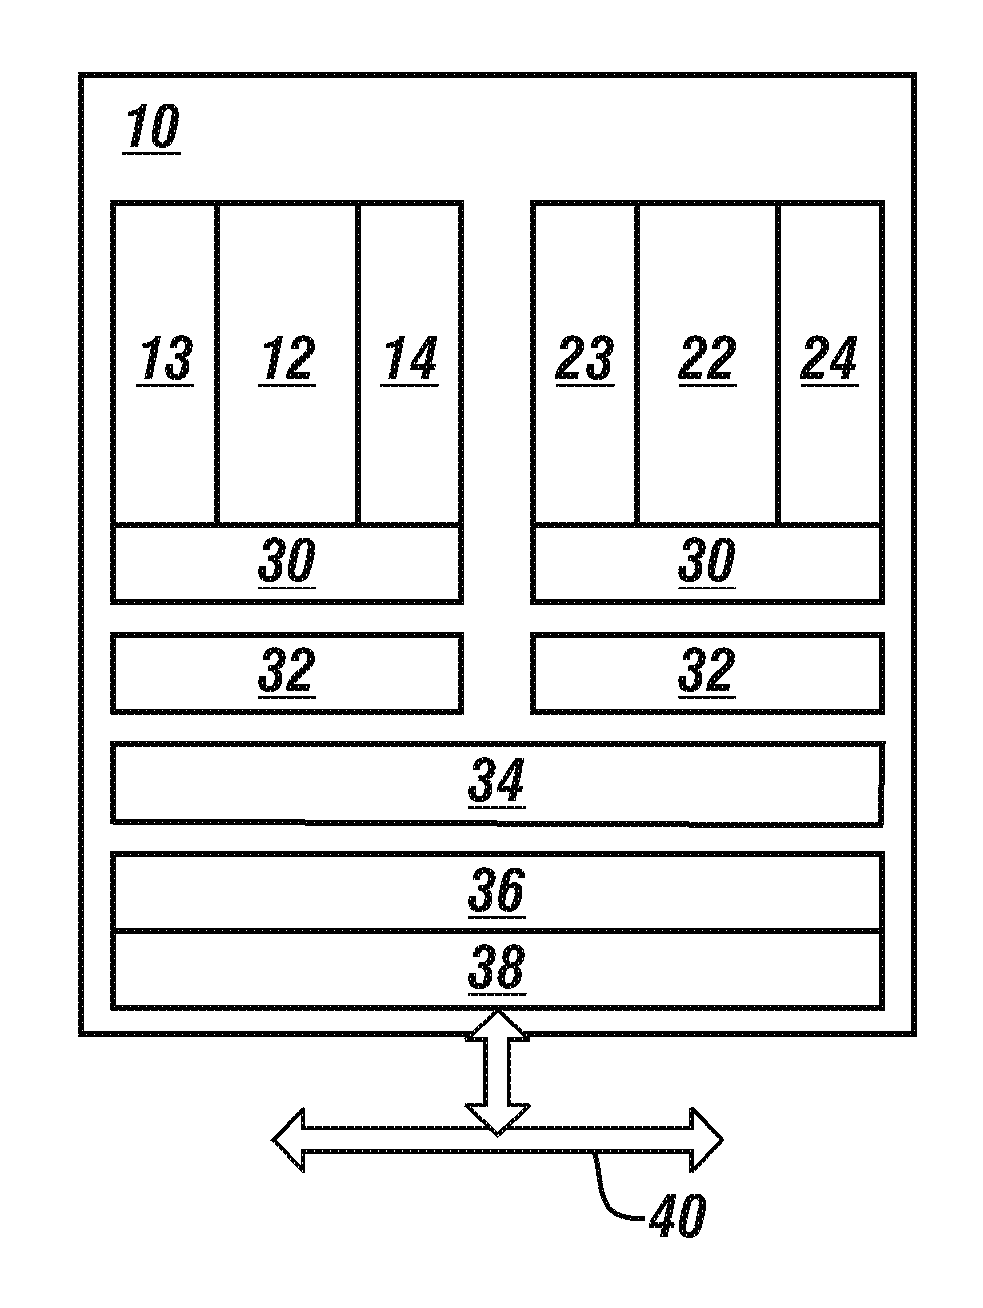 Method and apparatus for improving processing performance of a multi-core processor